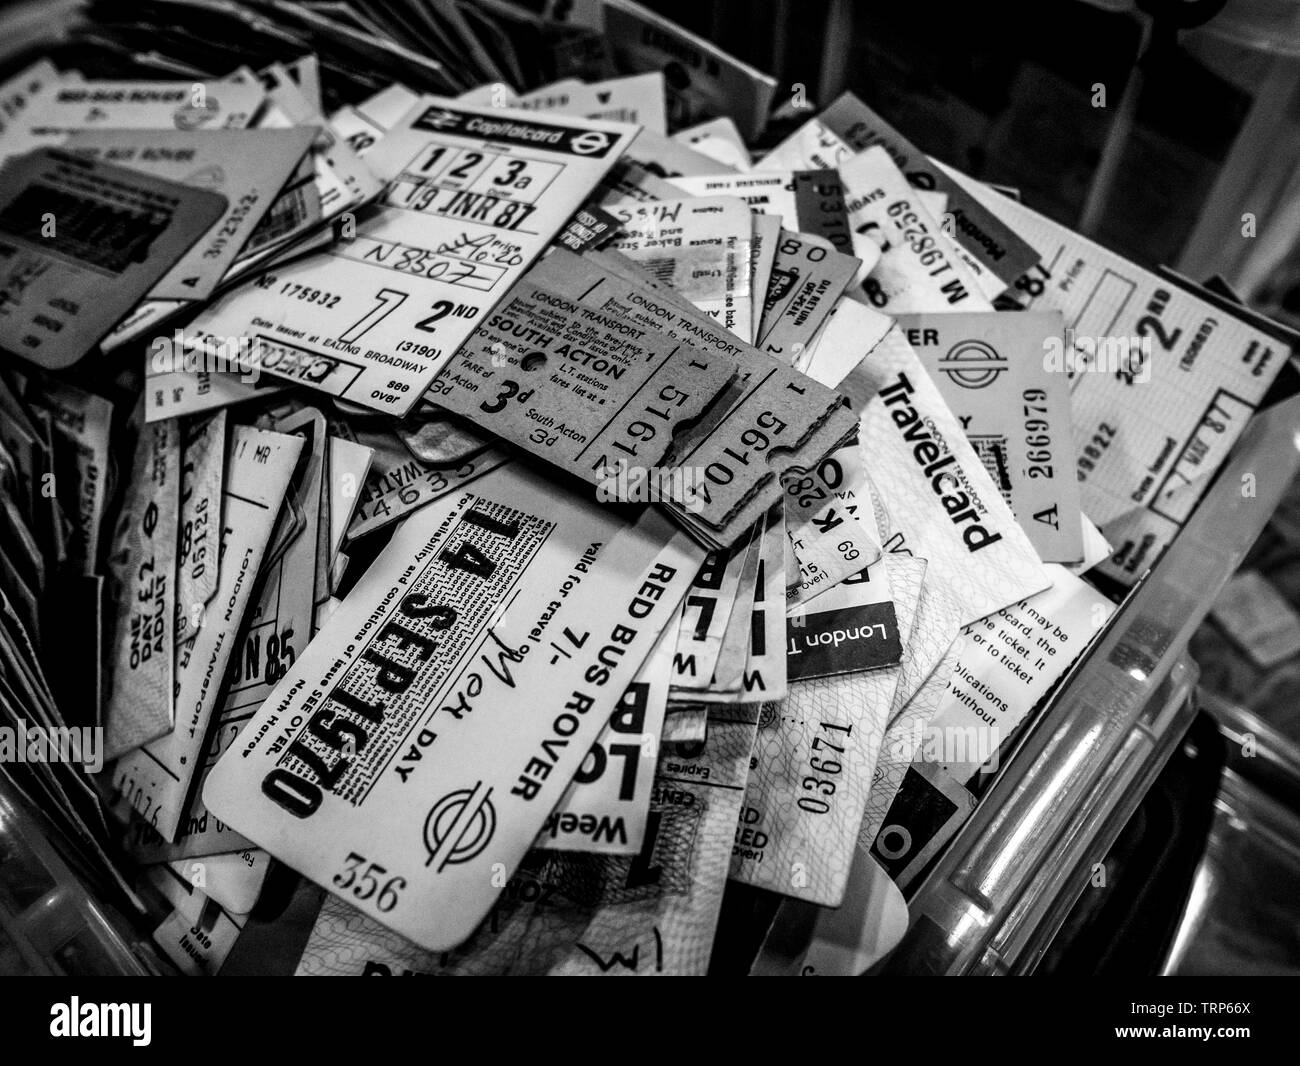 Used  Bus and Train tickets, taken at London Transport Museum Depot in Black and White Stock Photo